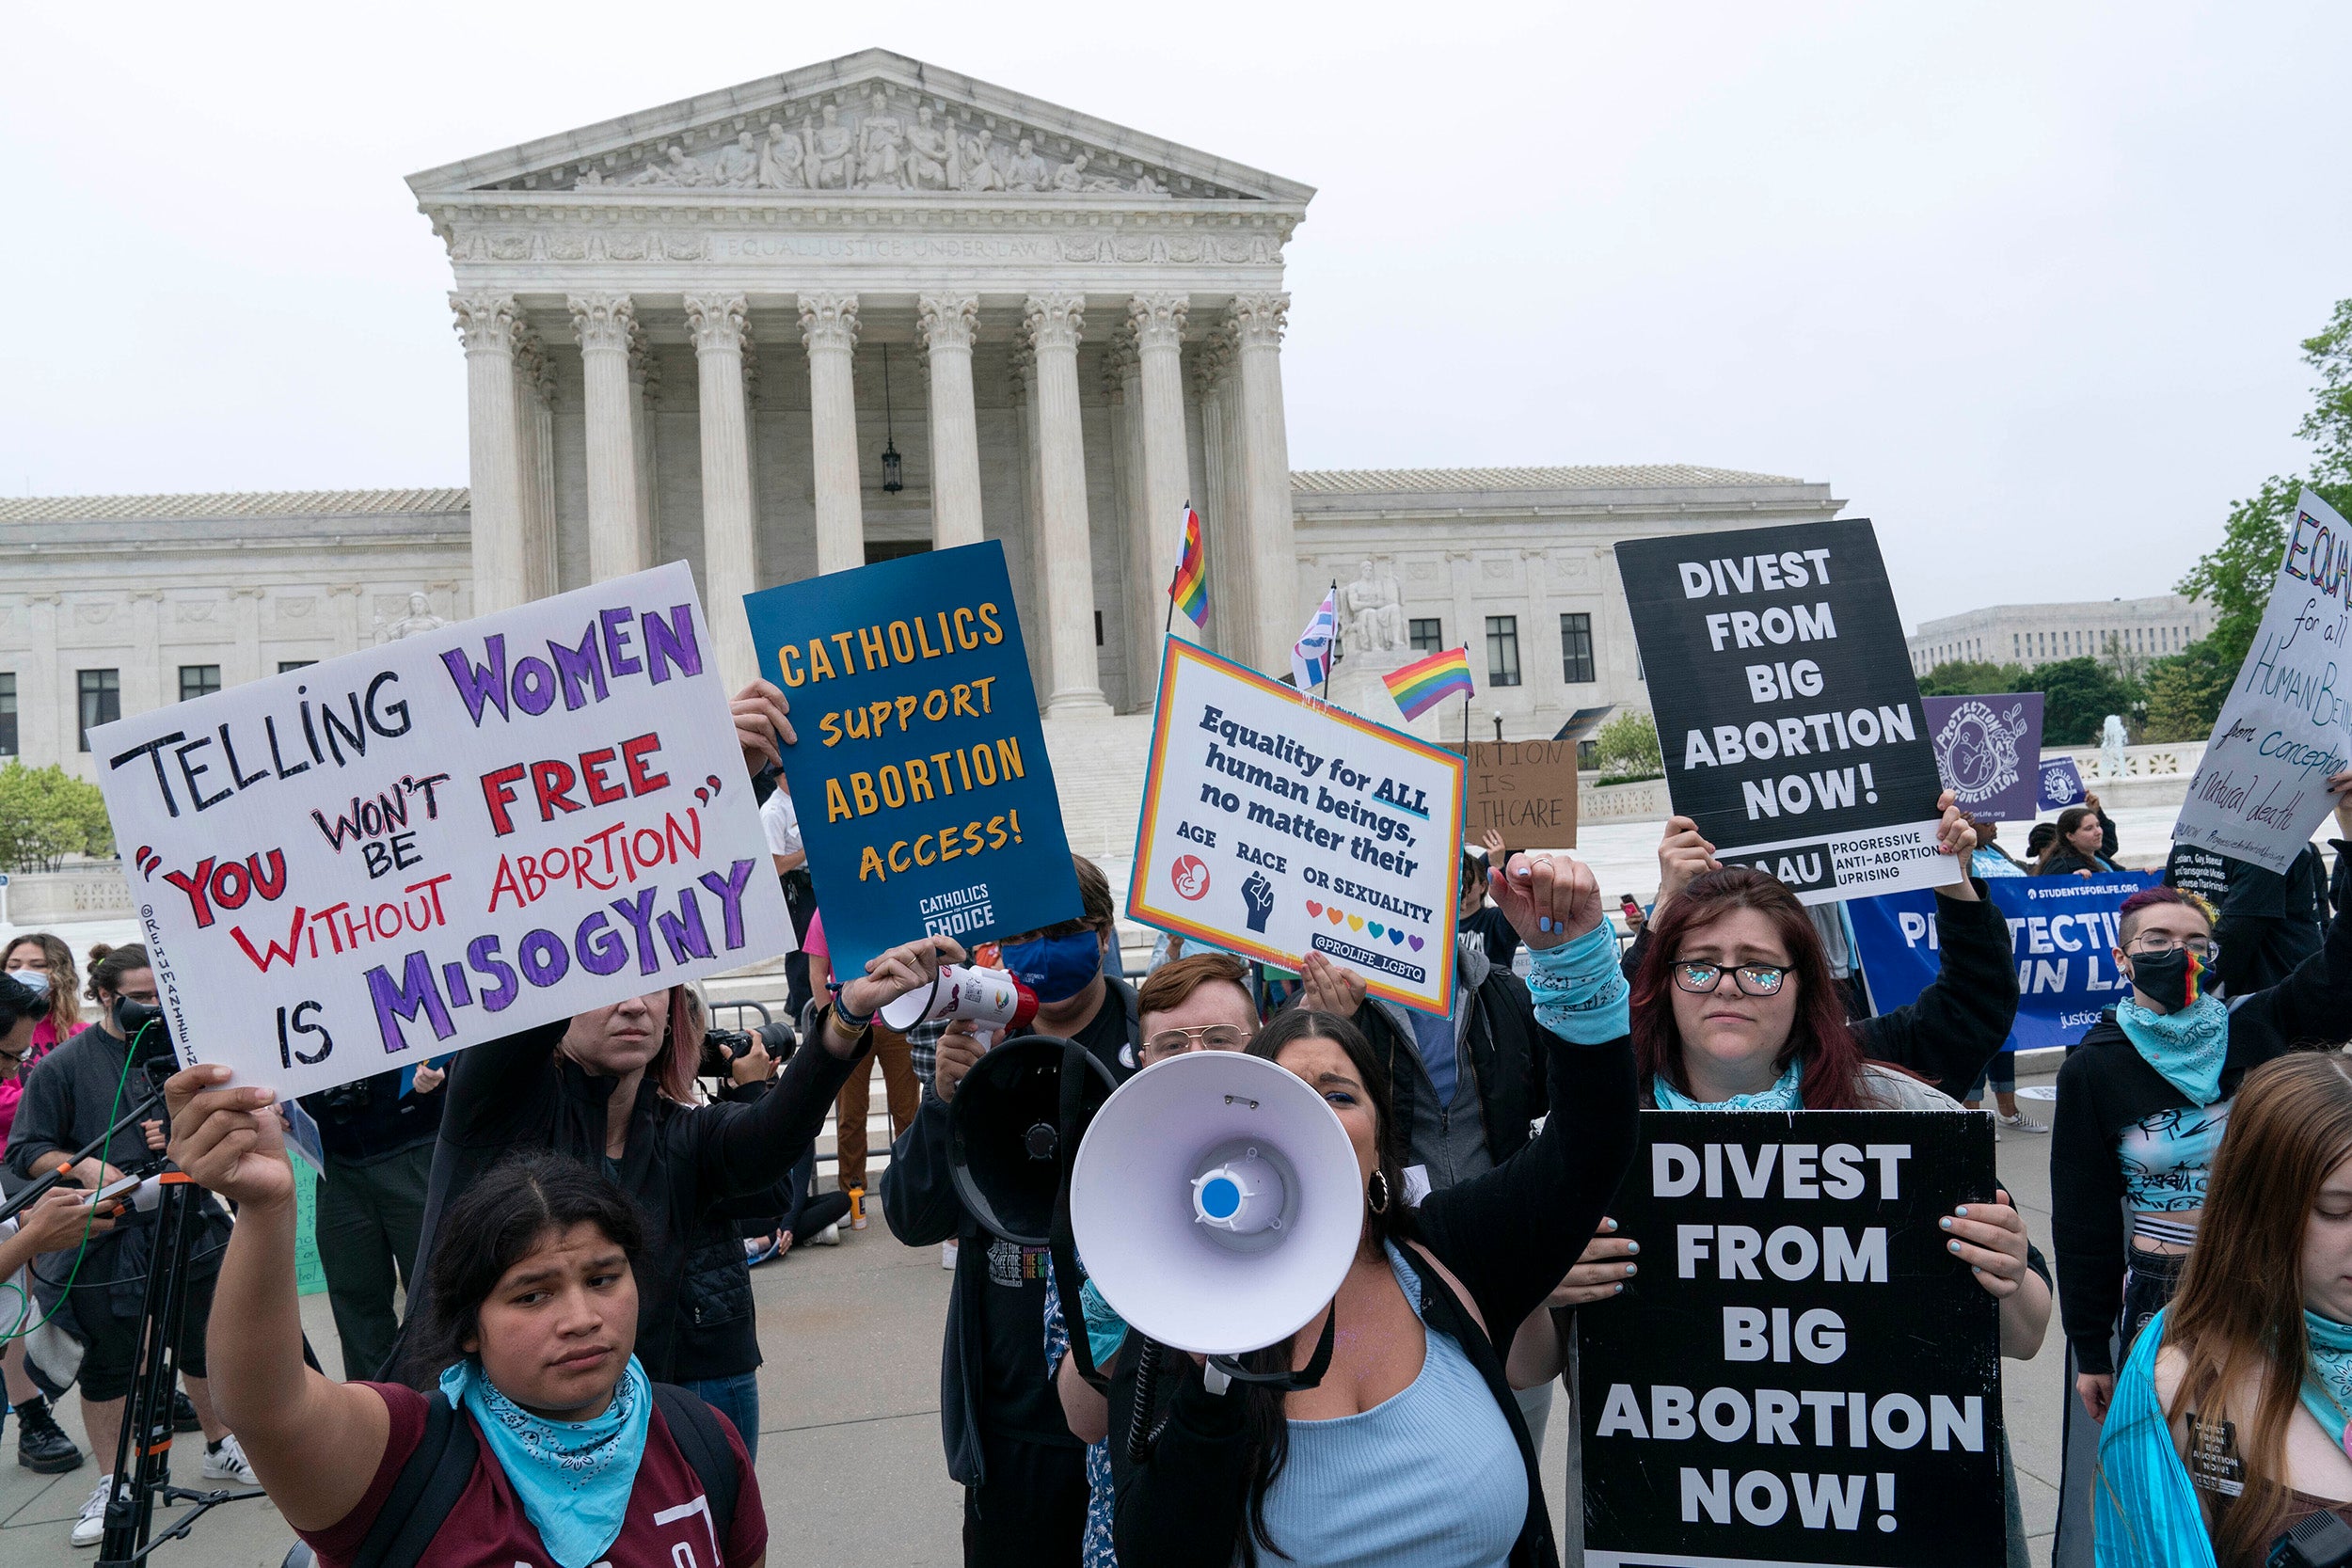 Demonstrators hold signs for and against abortion rights outside Supreme Court.